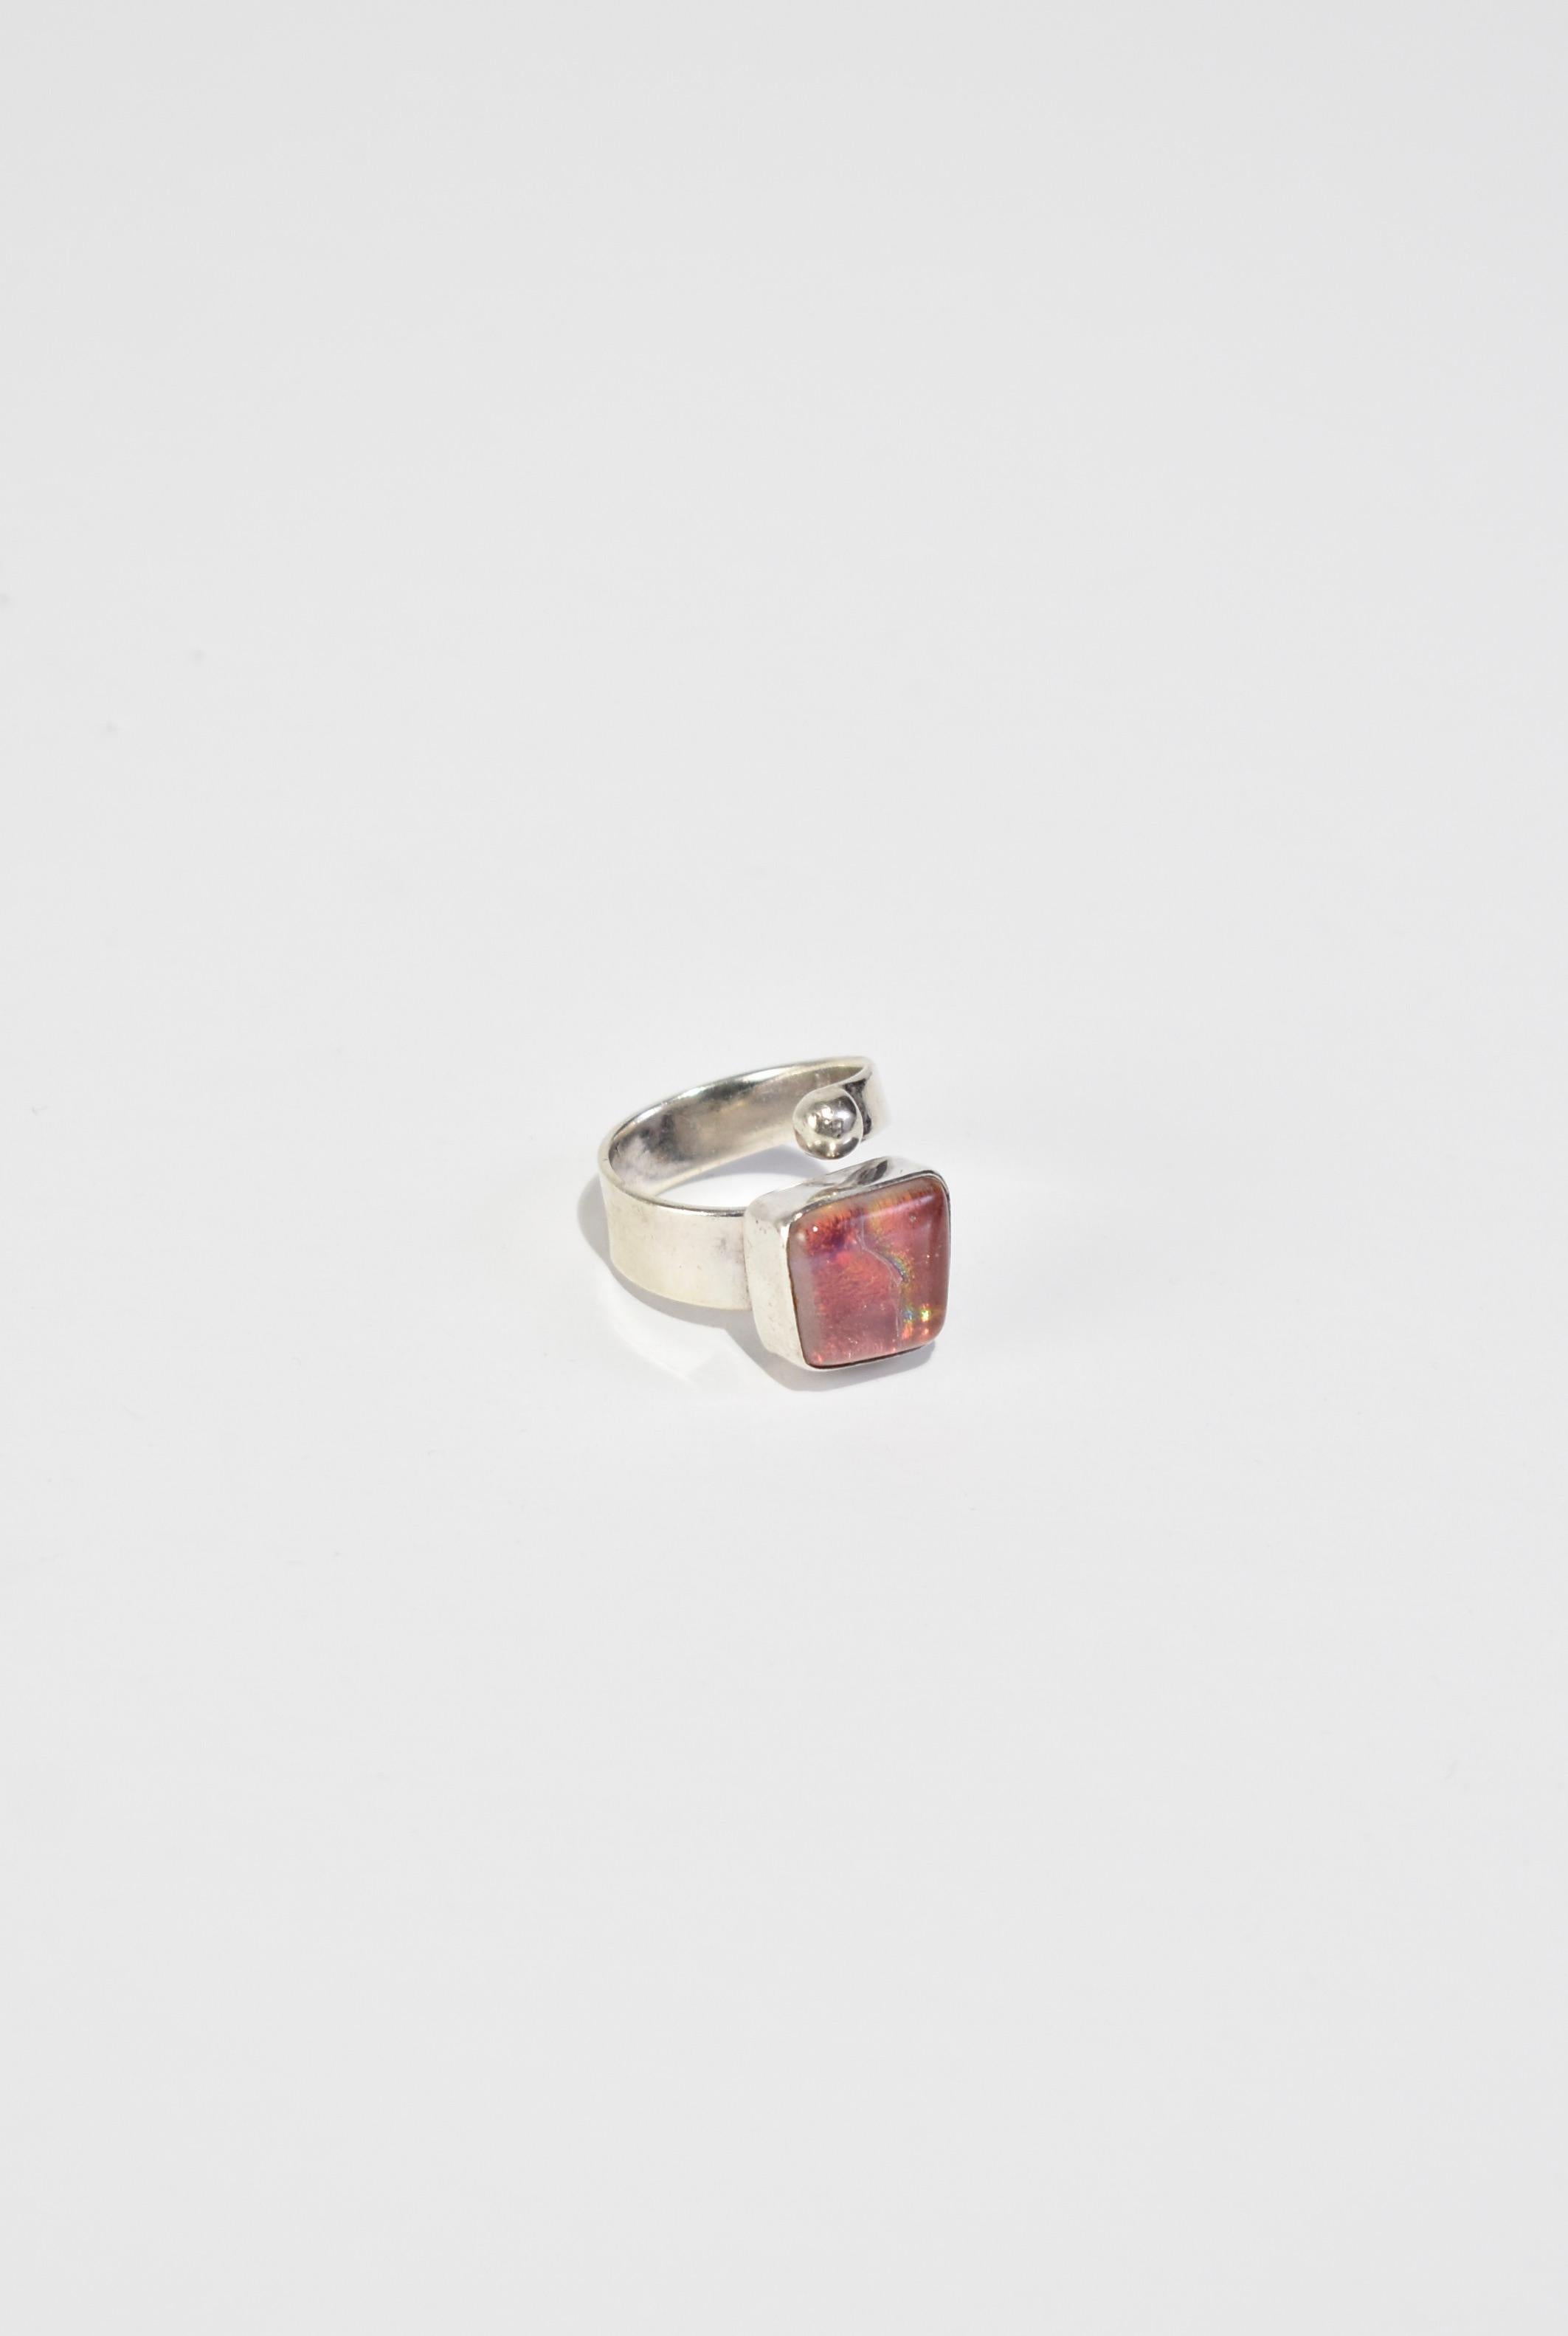 Vintage sterling wrap ring with iridescent pink glass detail. Stamped 925.

Material: Sterling silver, glass.